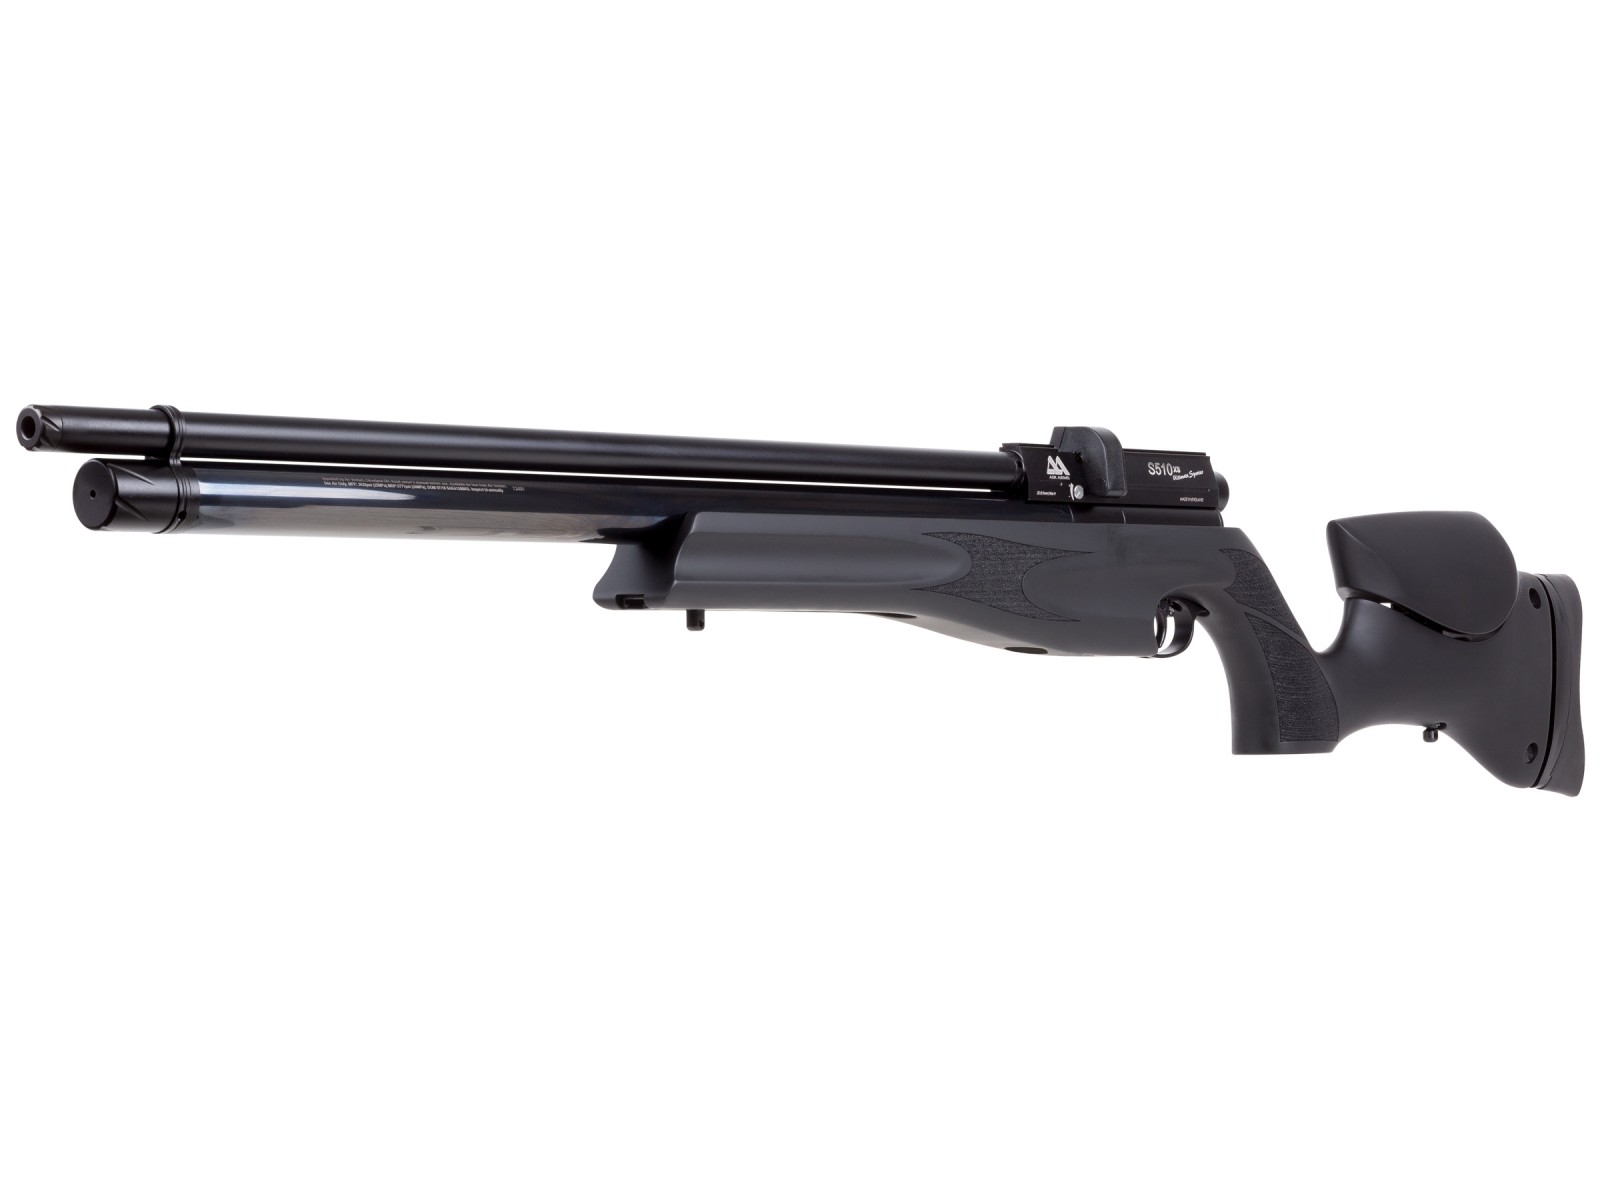 Air Arms S510 XS Ultimate Sporter Xtra FAC, Black Soft Touch